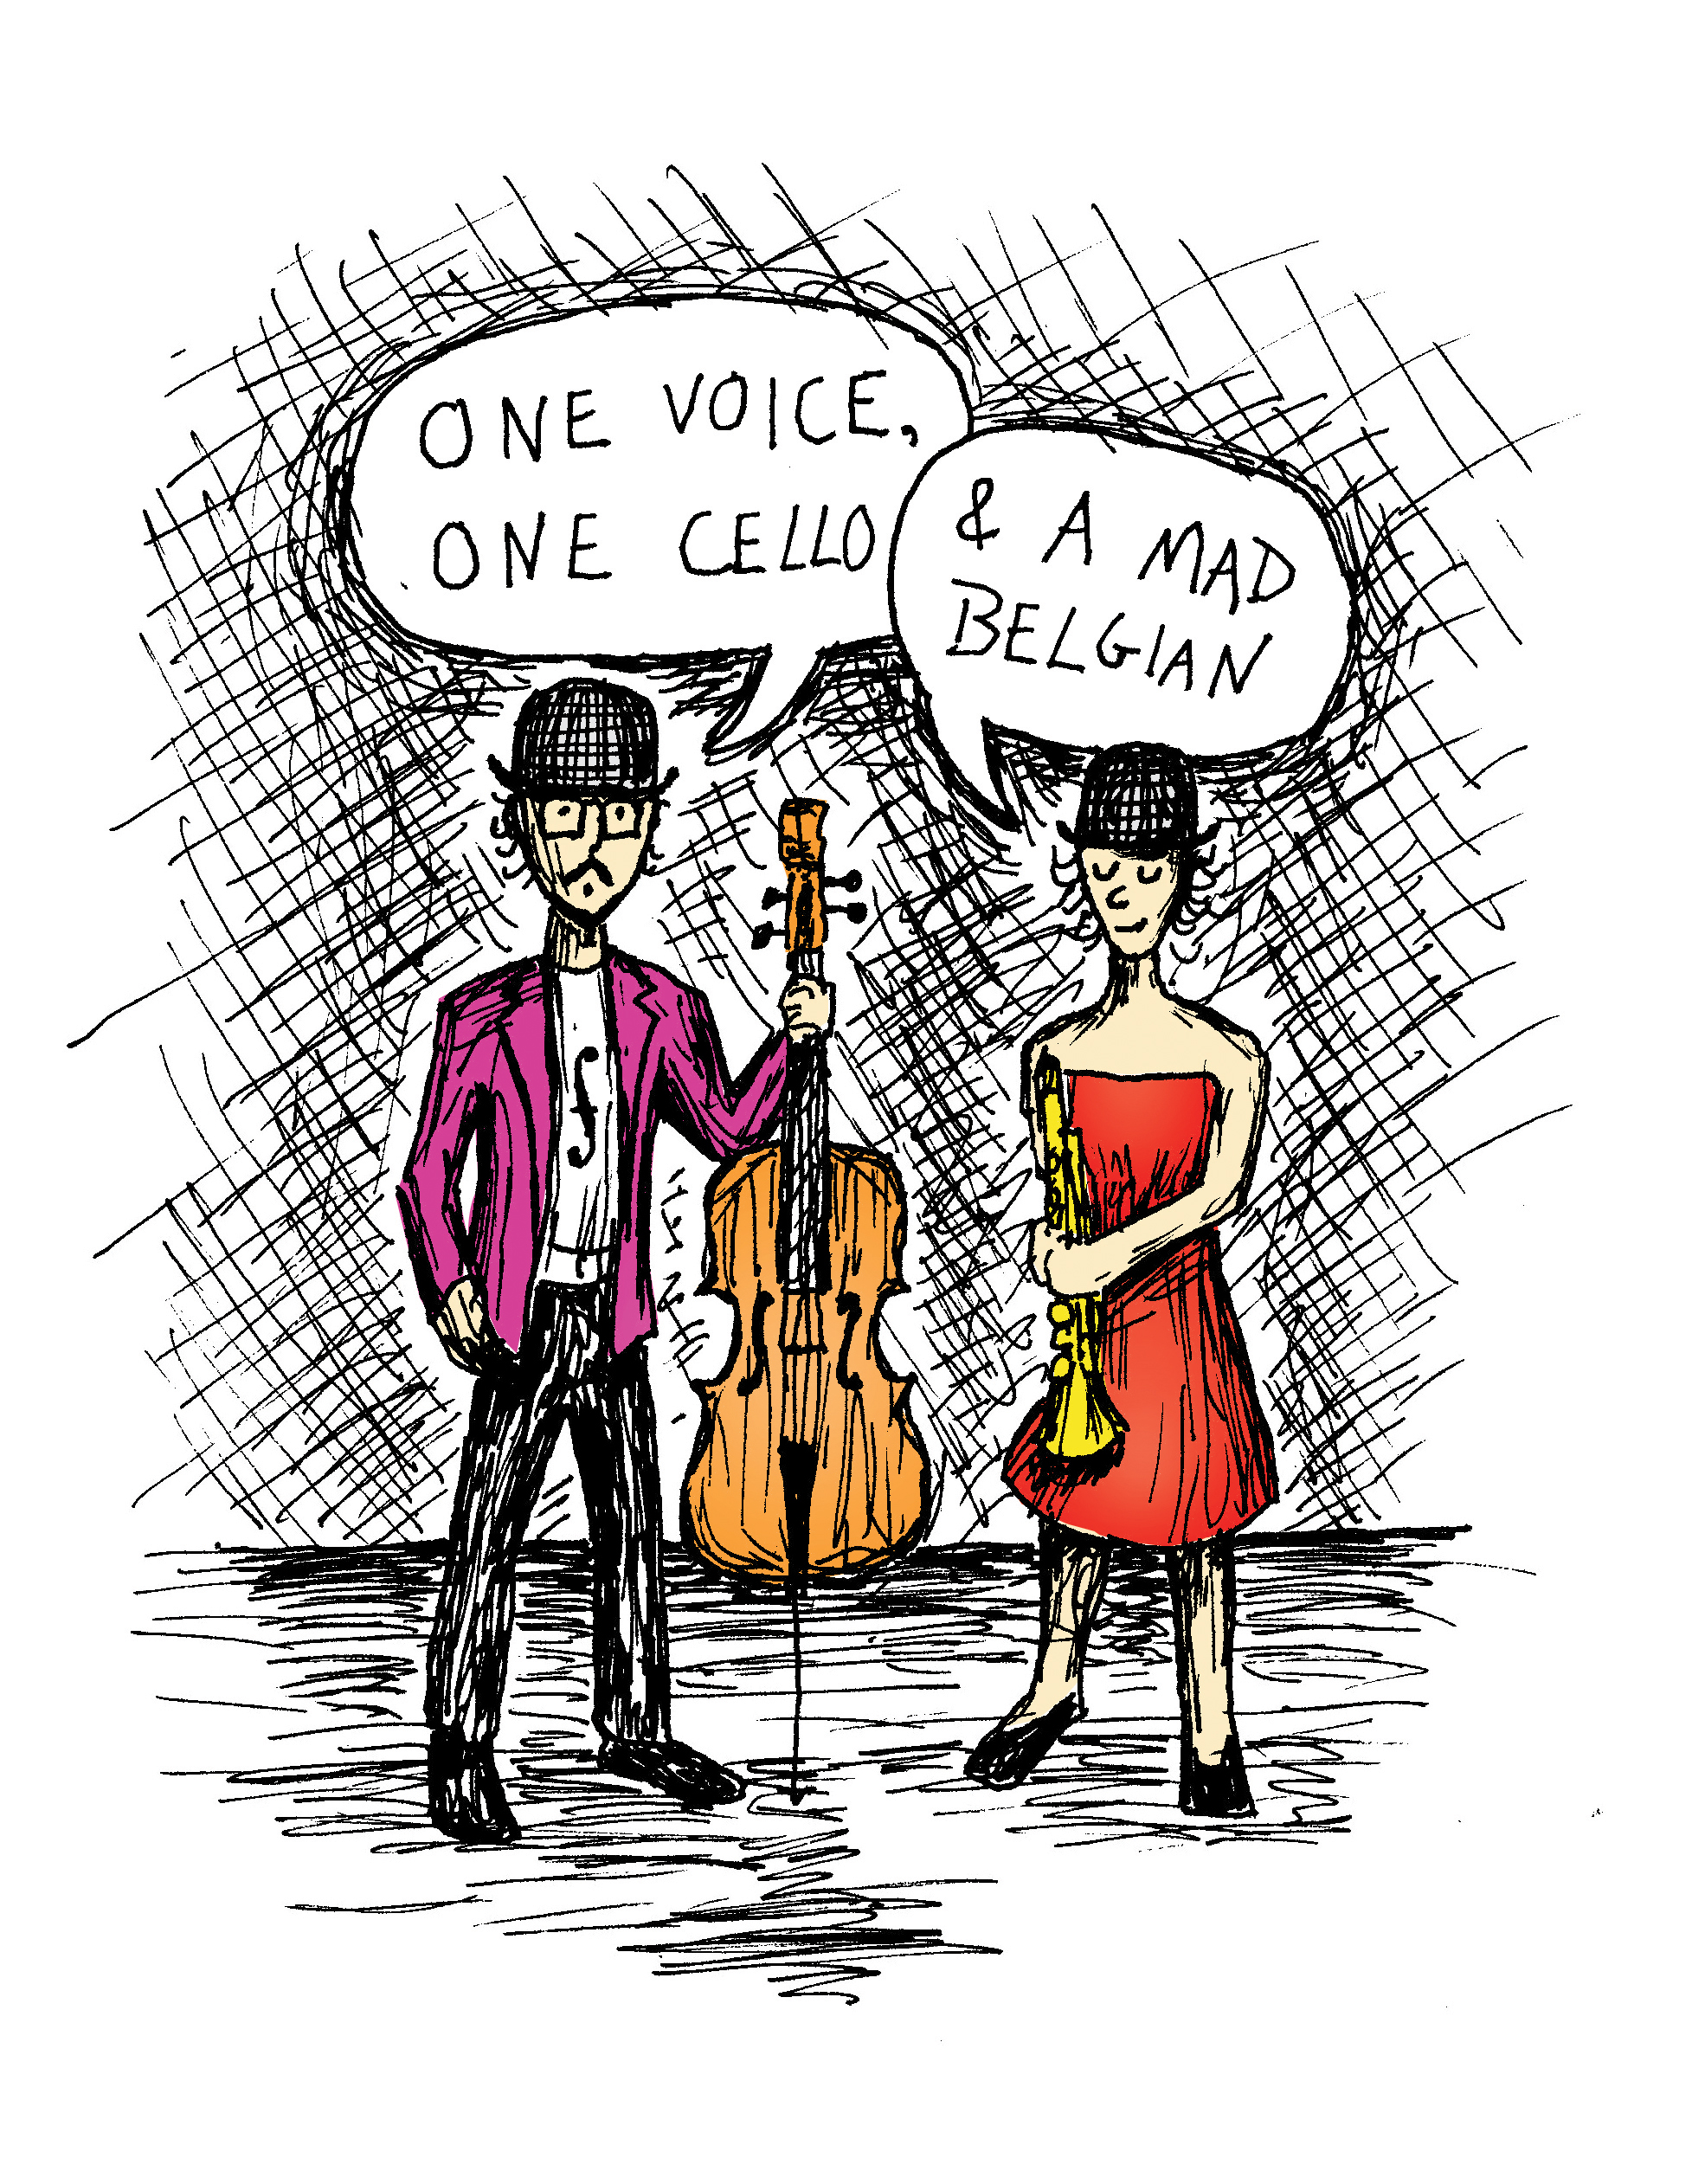 One Voice, One Cello & A Mad Belgian